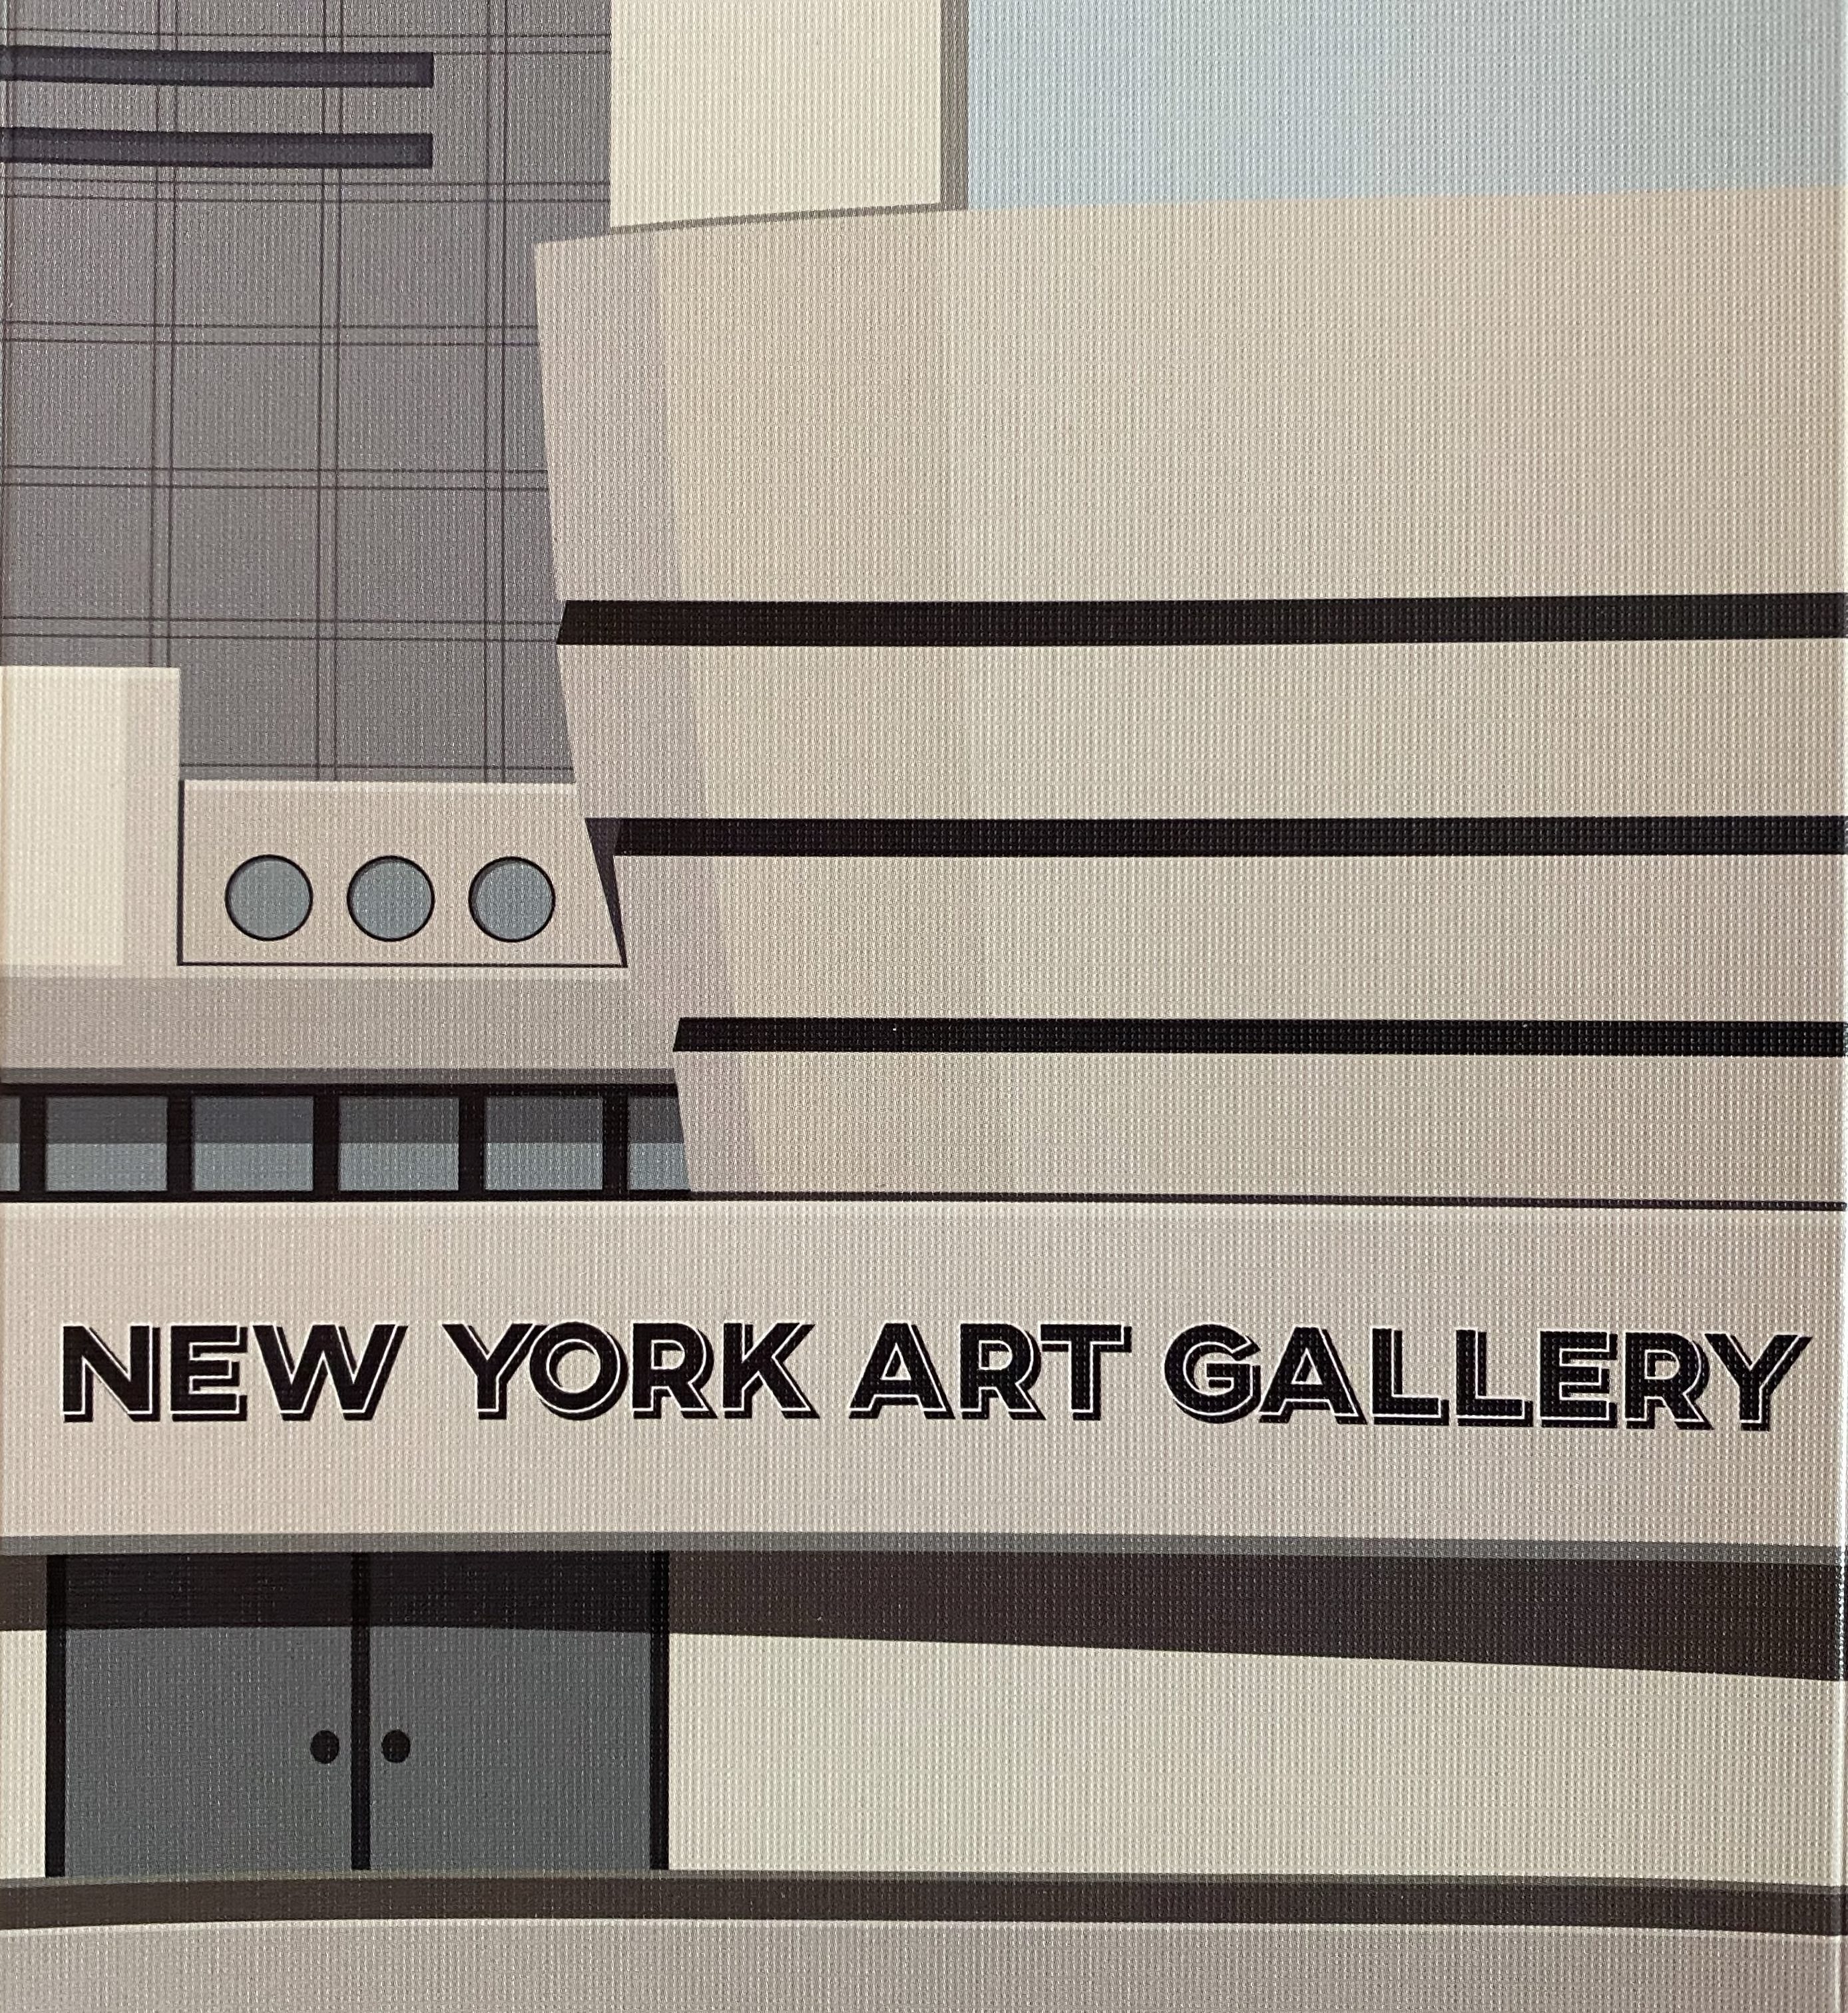 The text says "New York Art Gallery" and the design of the building looks like Guggenheim New York.